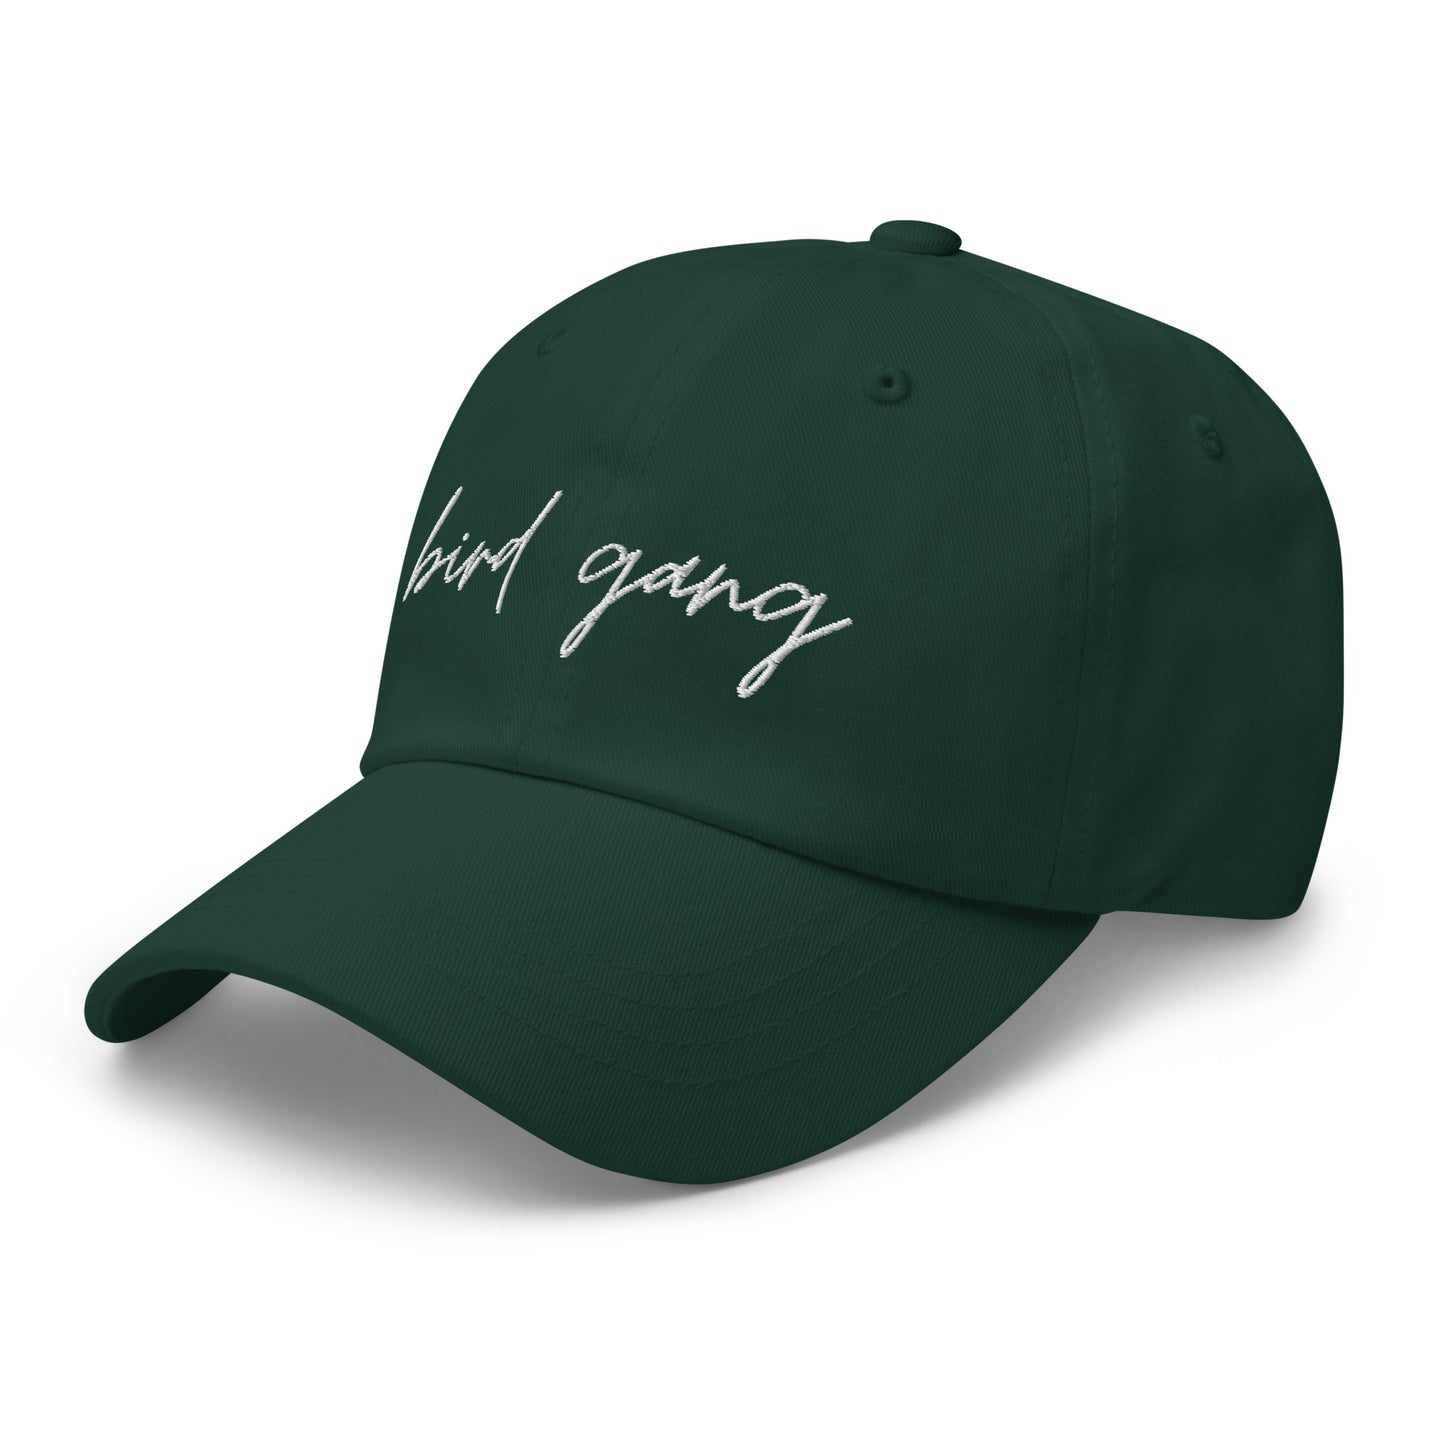 Bird Gang Hand Embroidered Dat Hat